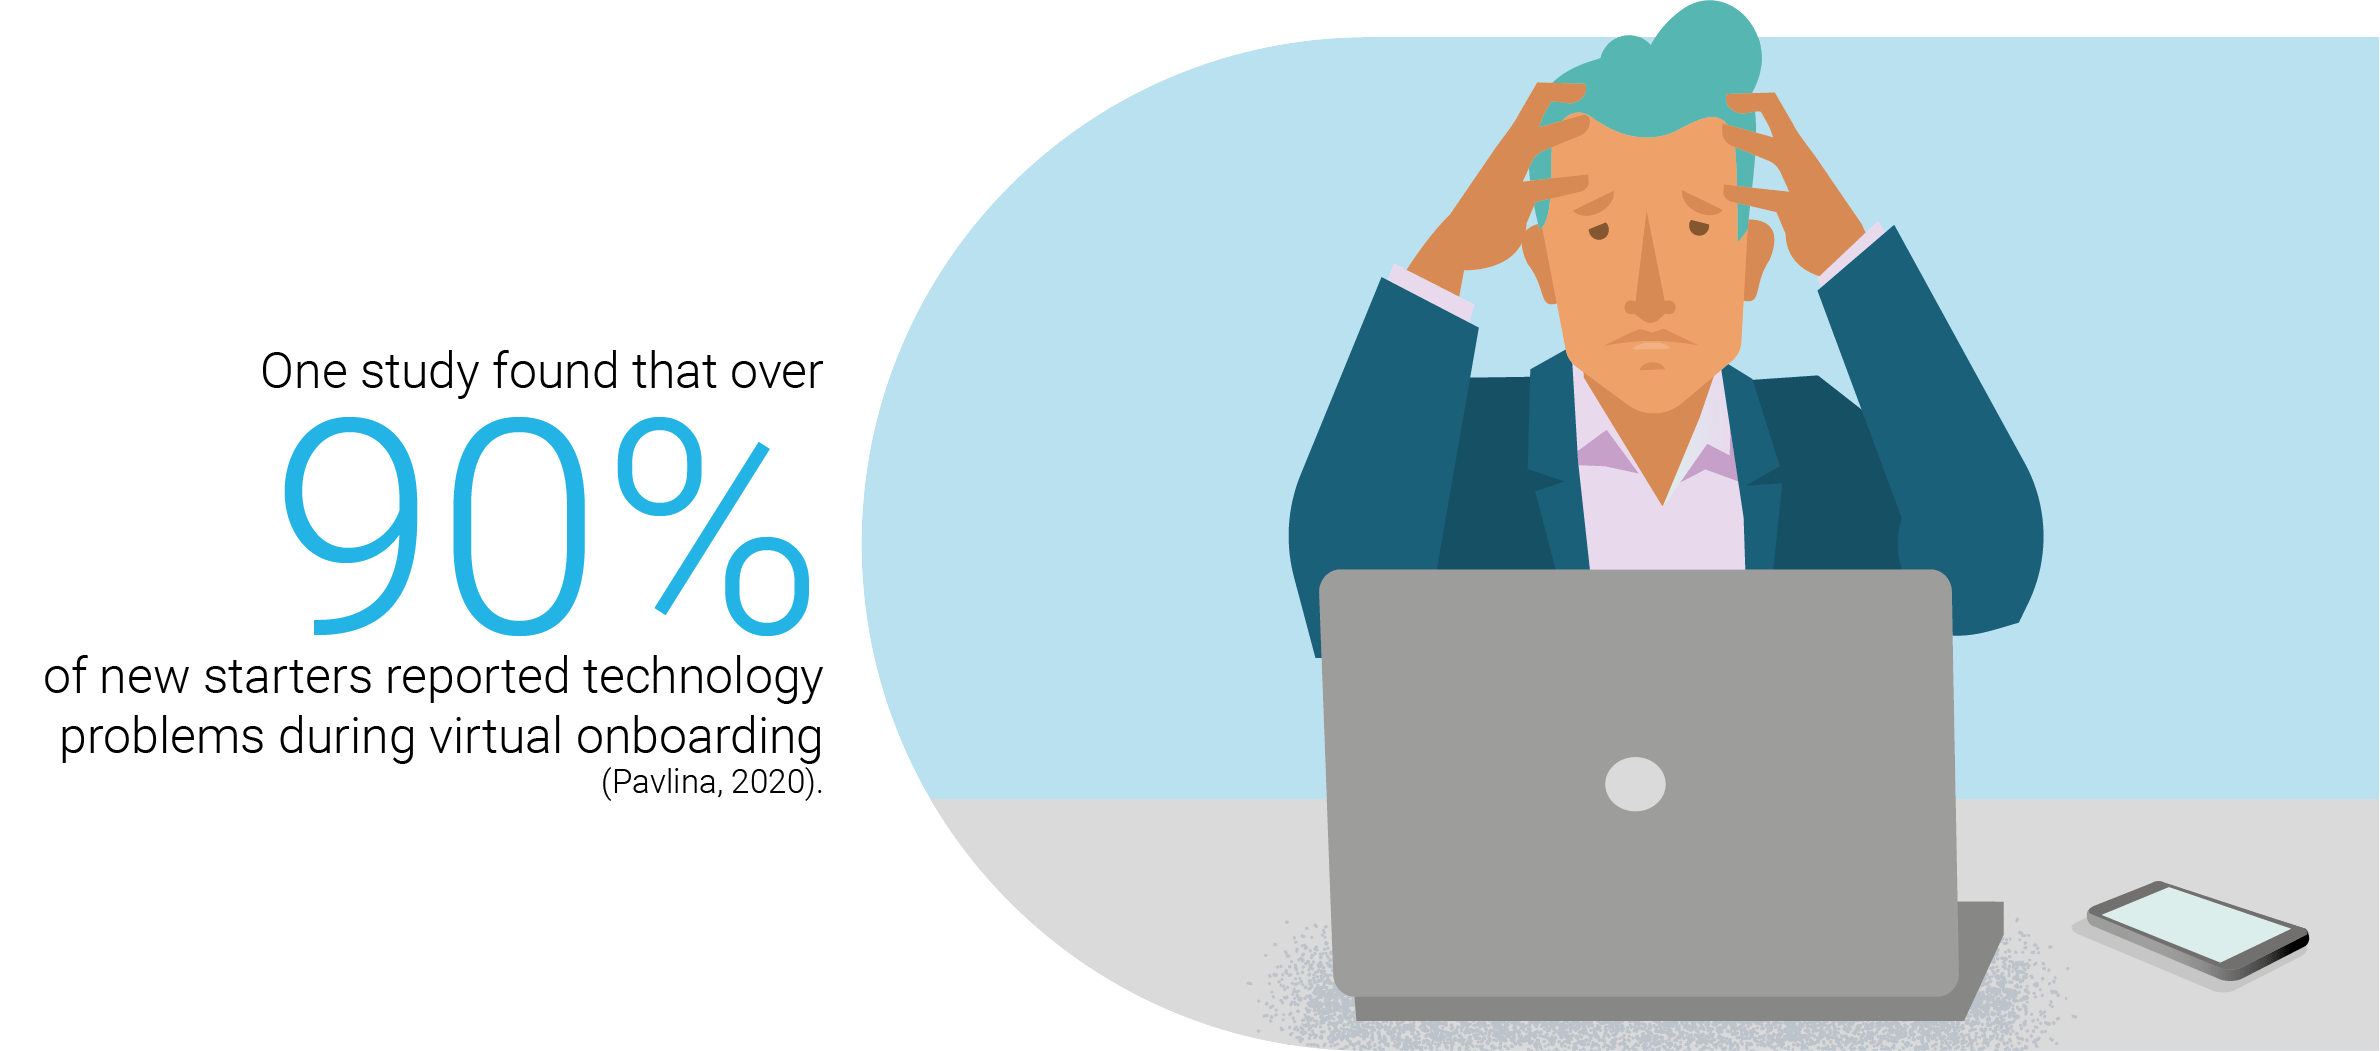 One study found that over 90% of new starters reported technology problems during virtual onboarding (Pavlina, 2020)